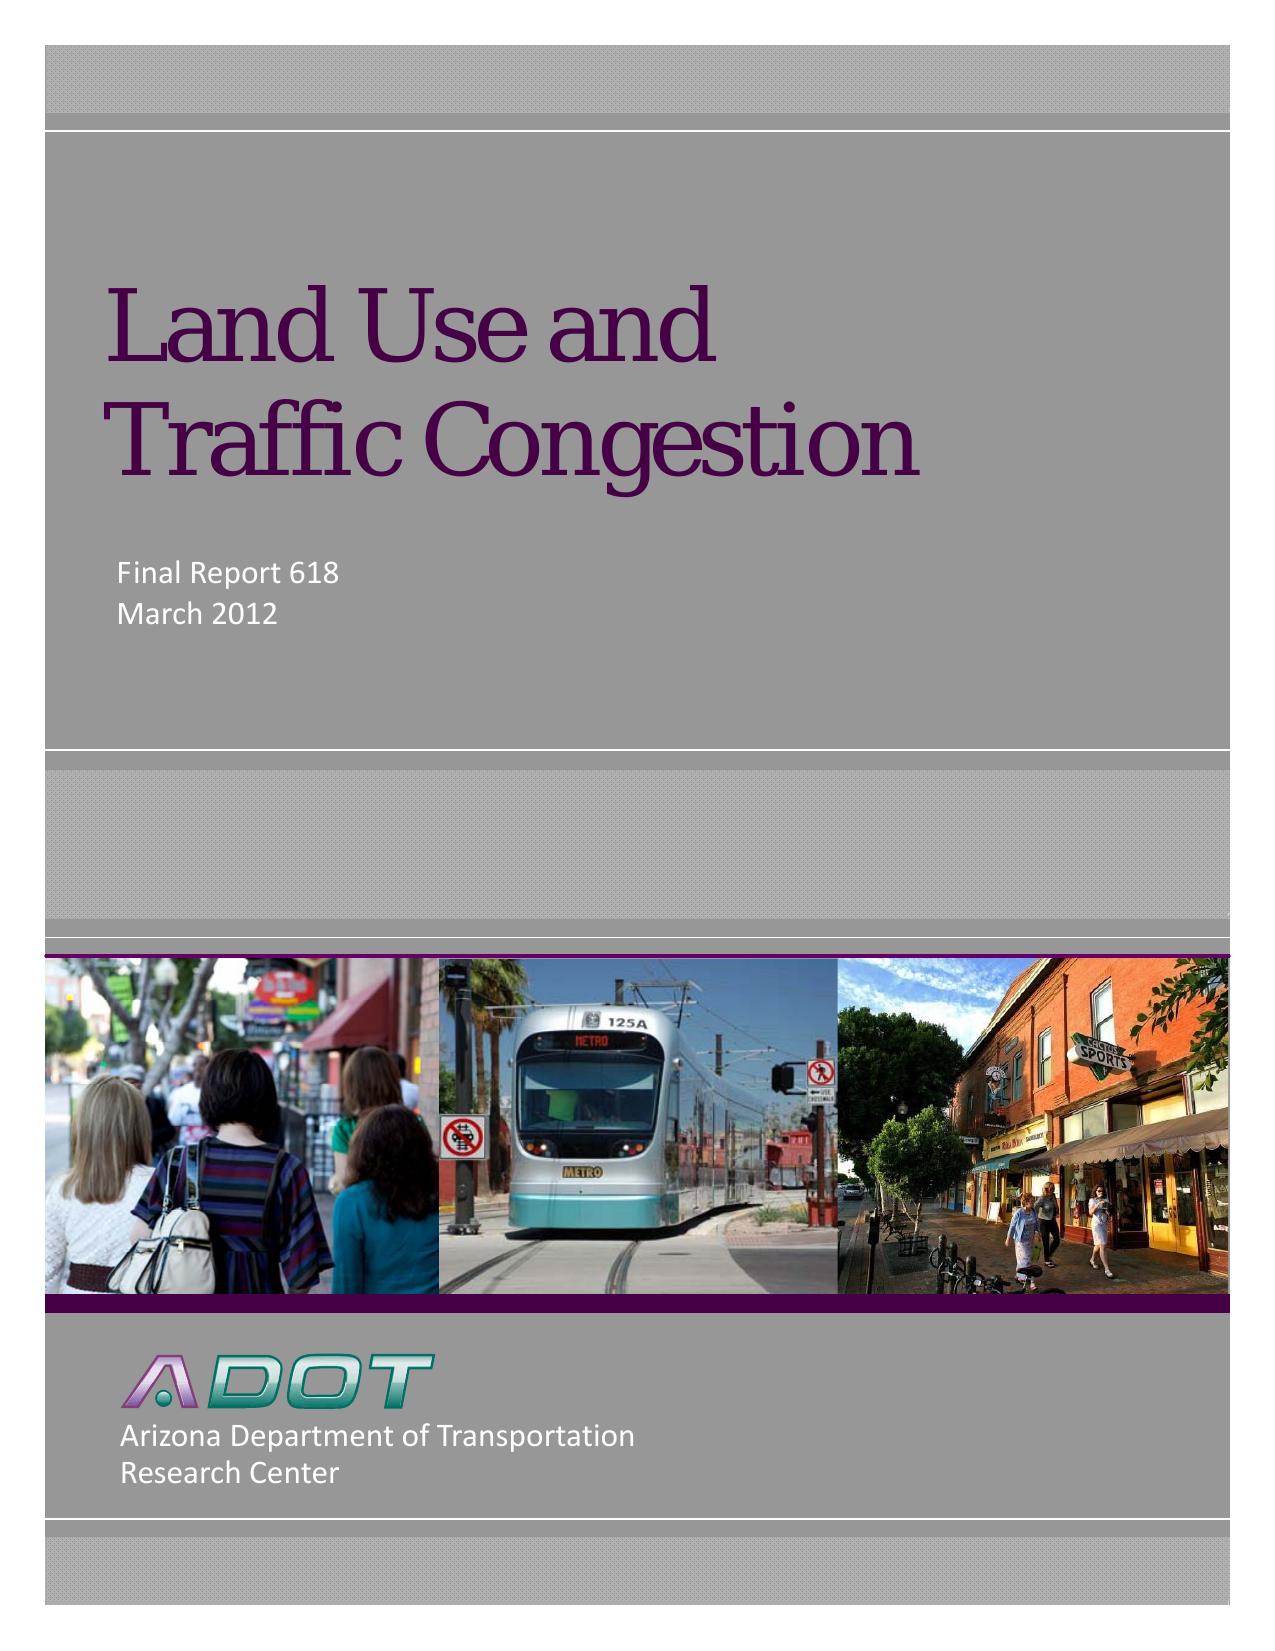 SPR 618 - Land Use and Traffic Congestion